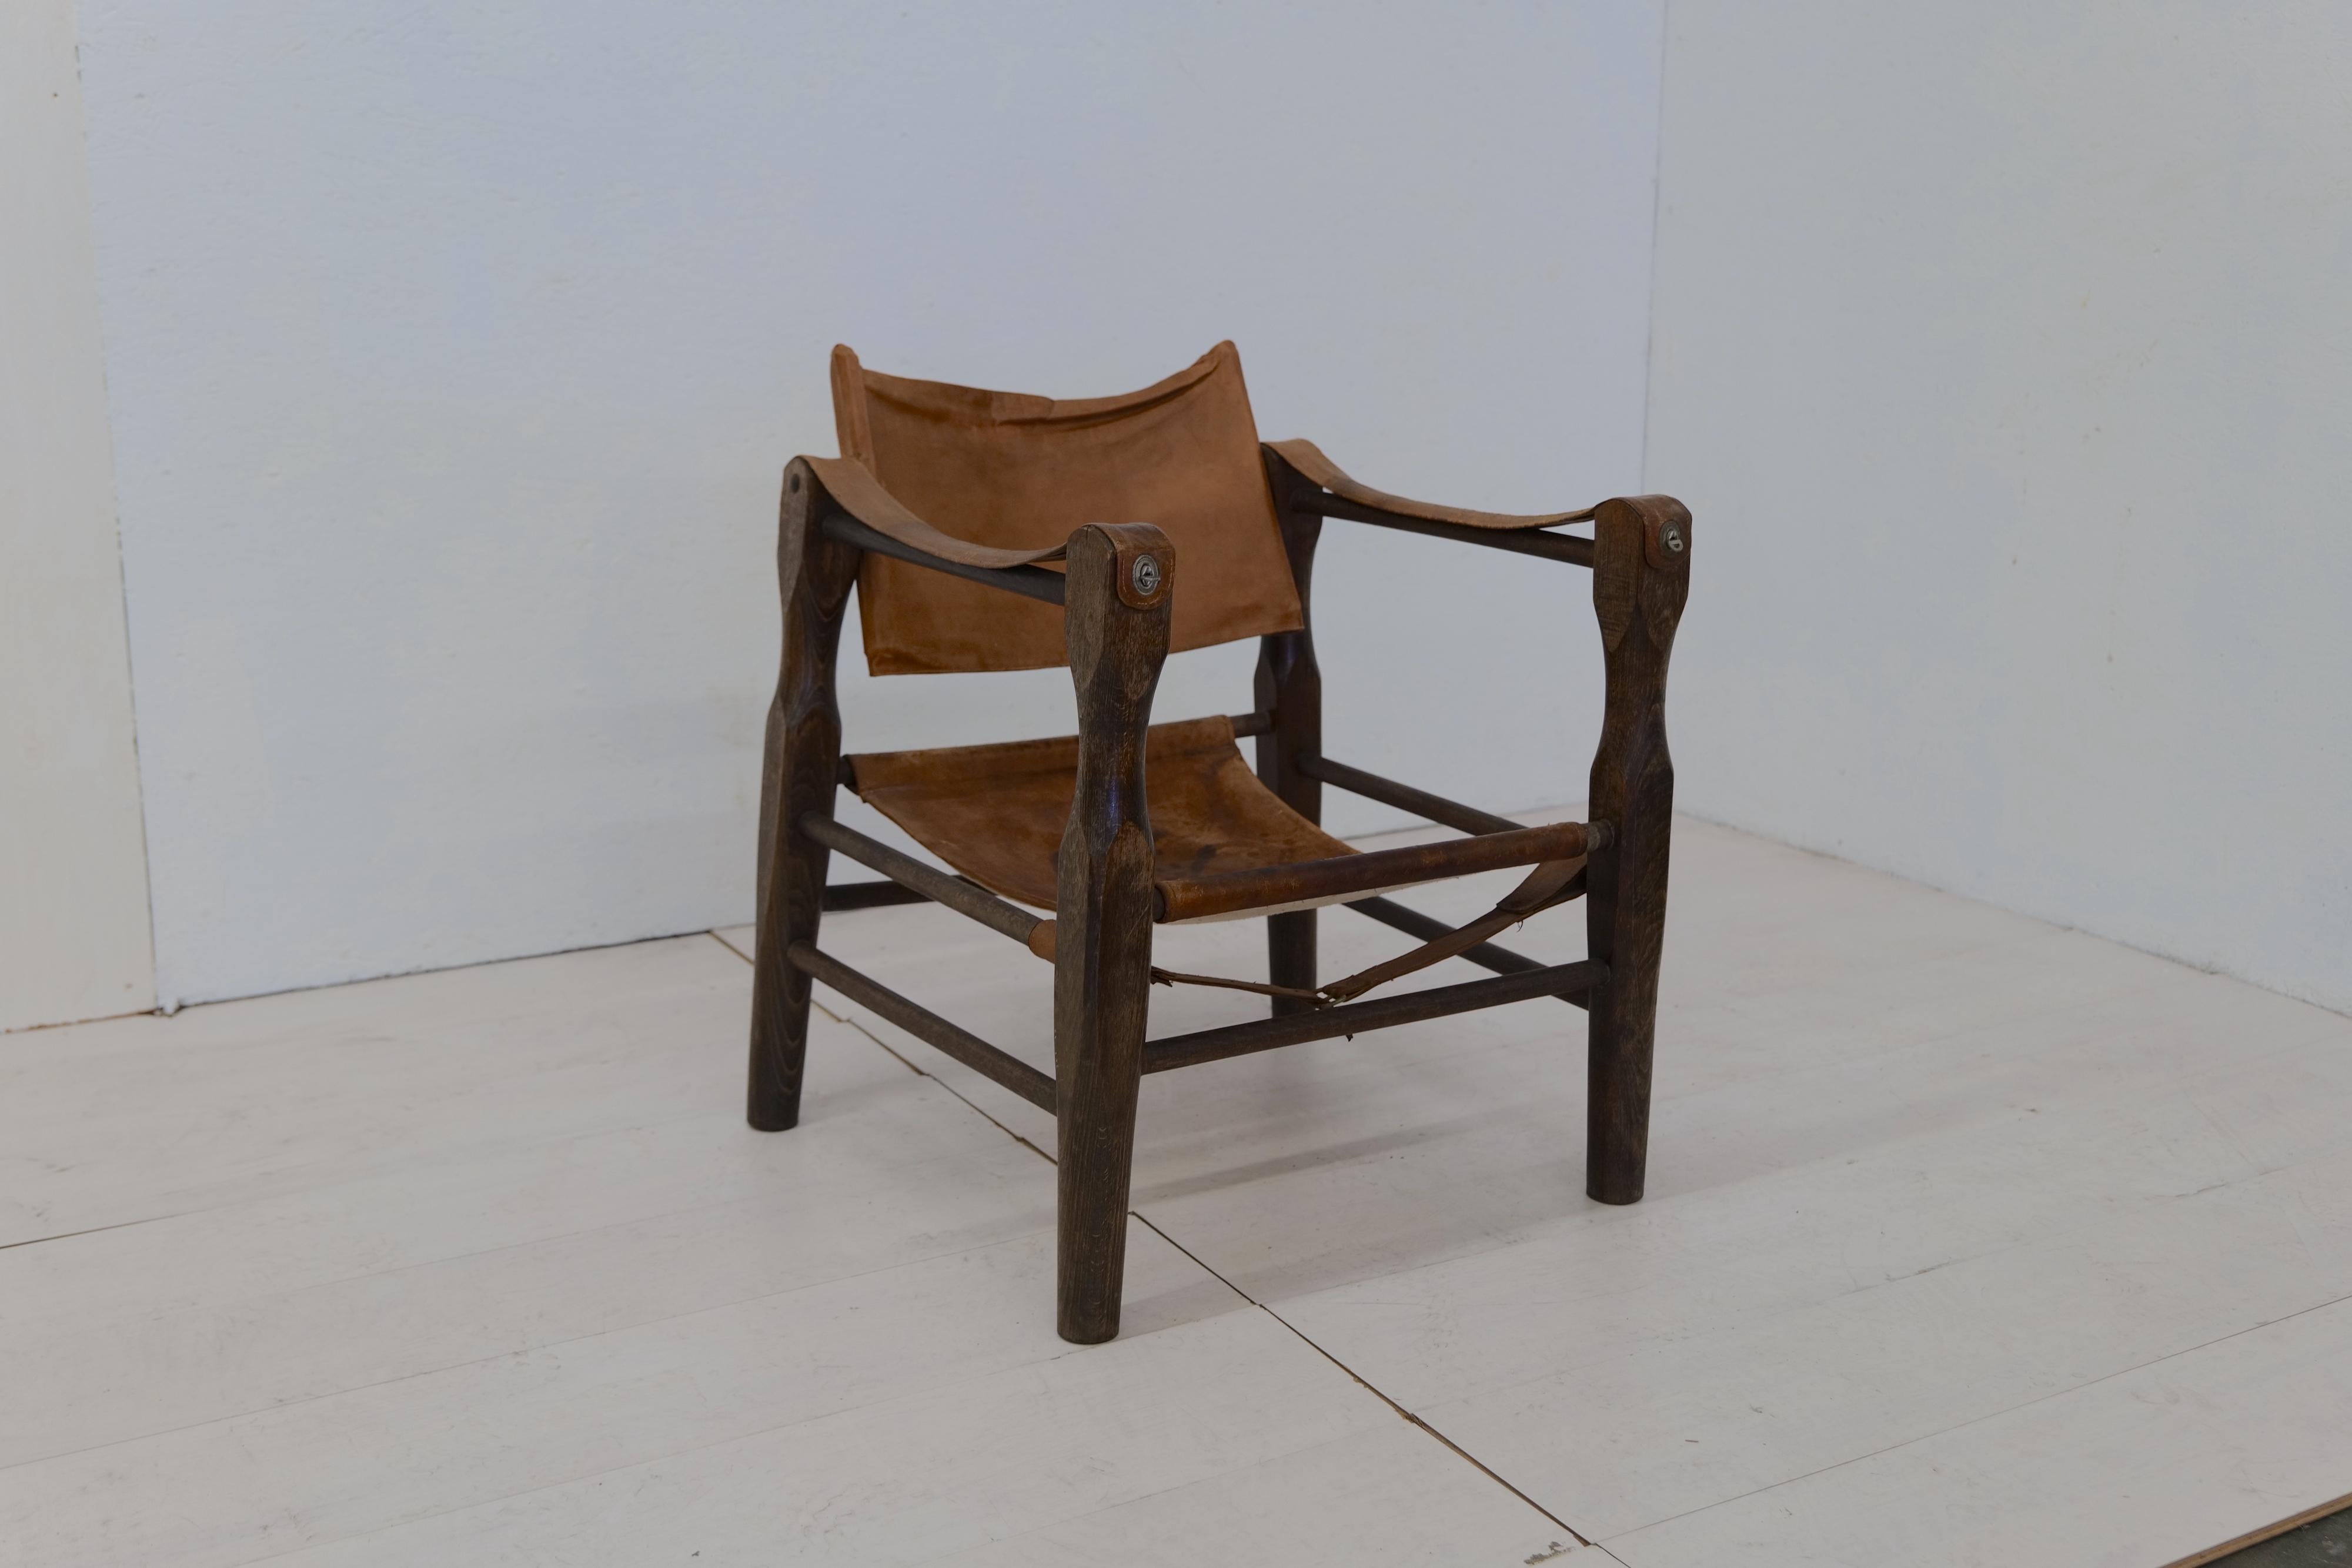 The Vintage Italian Leather and Wood Safari Chair from the 1970s is a distinctive and adventurous piece of furniture. Inspired by the African safari aesthetic, this chair showcases a wooden frame with sleek lines and folding functionality for easy